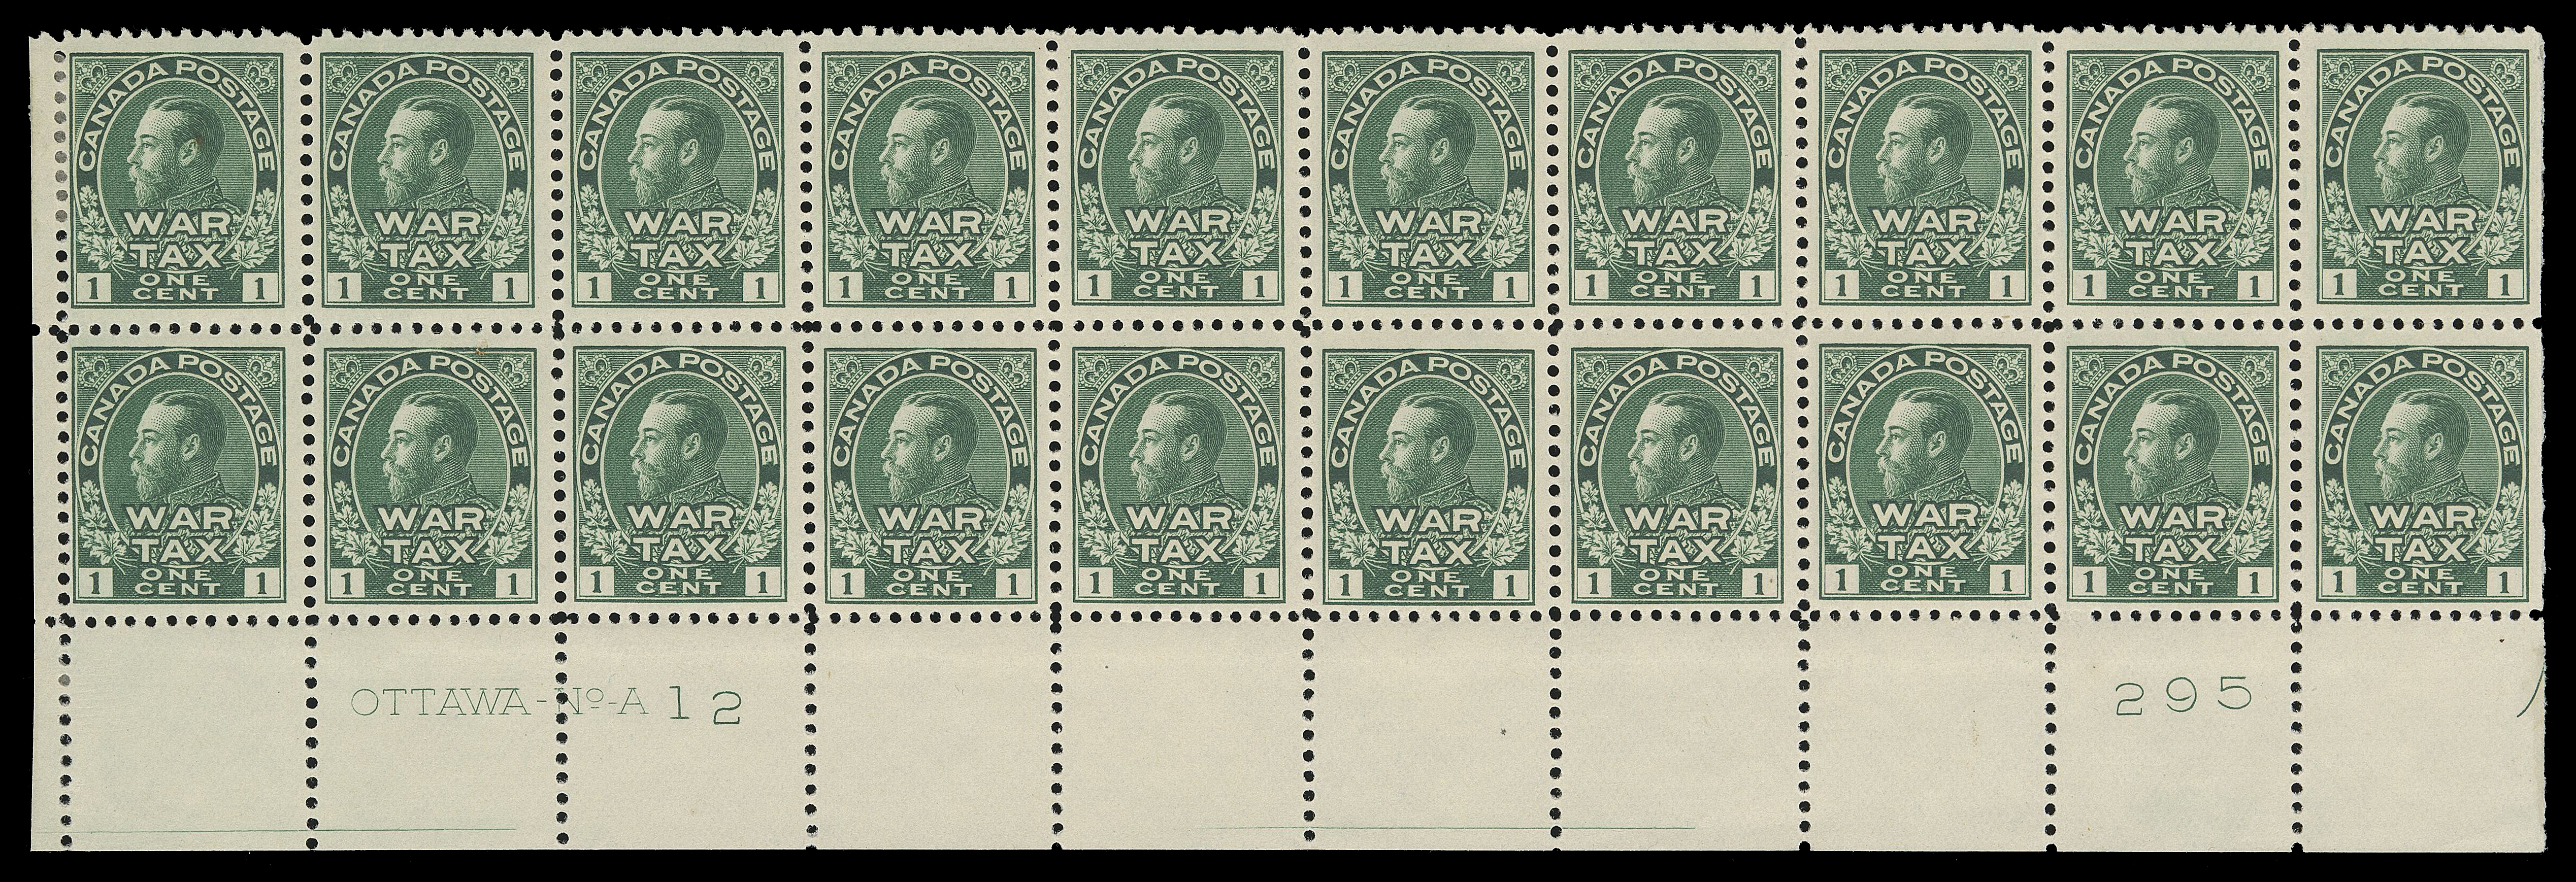 ADMIRAL STAMPS  MR1,Lower left Plate 12 block of twenty, printing order number "295" at right, hinged on upper corner stamps leaving eighteen NH, F-VF (Unitrade cat. $1,310)